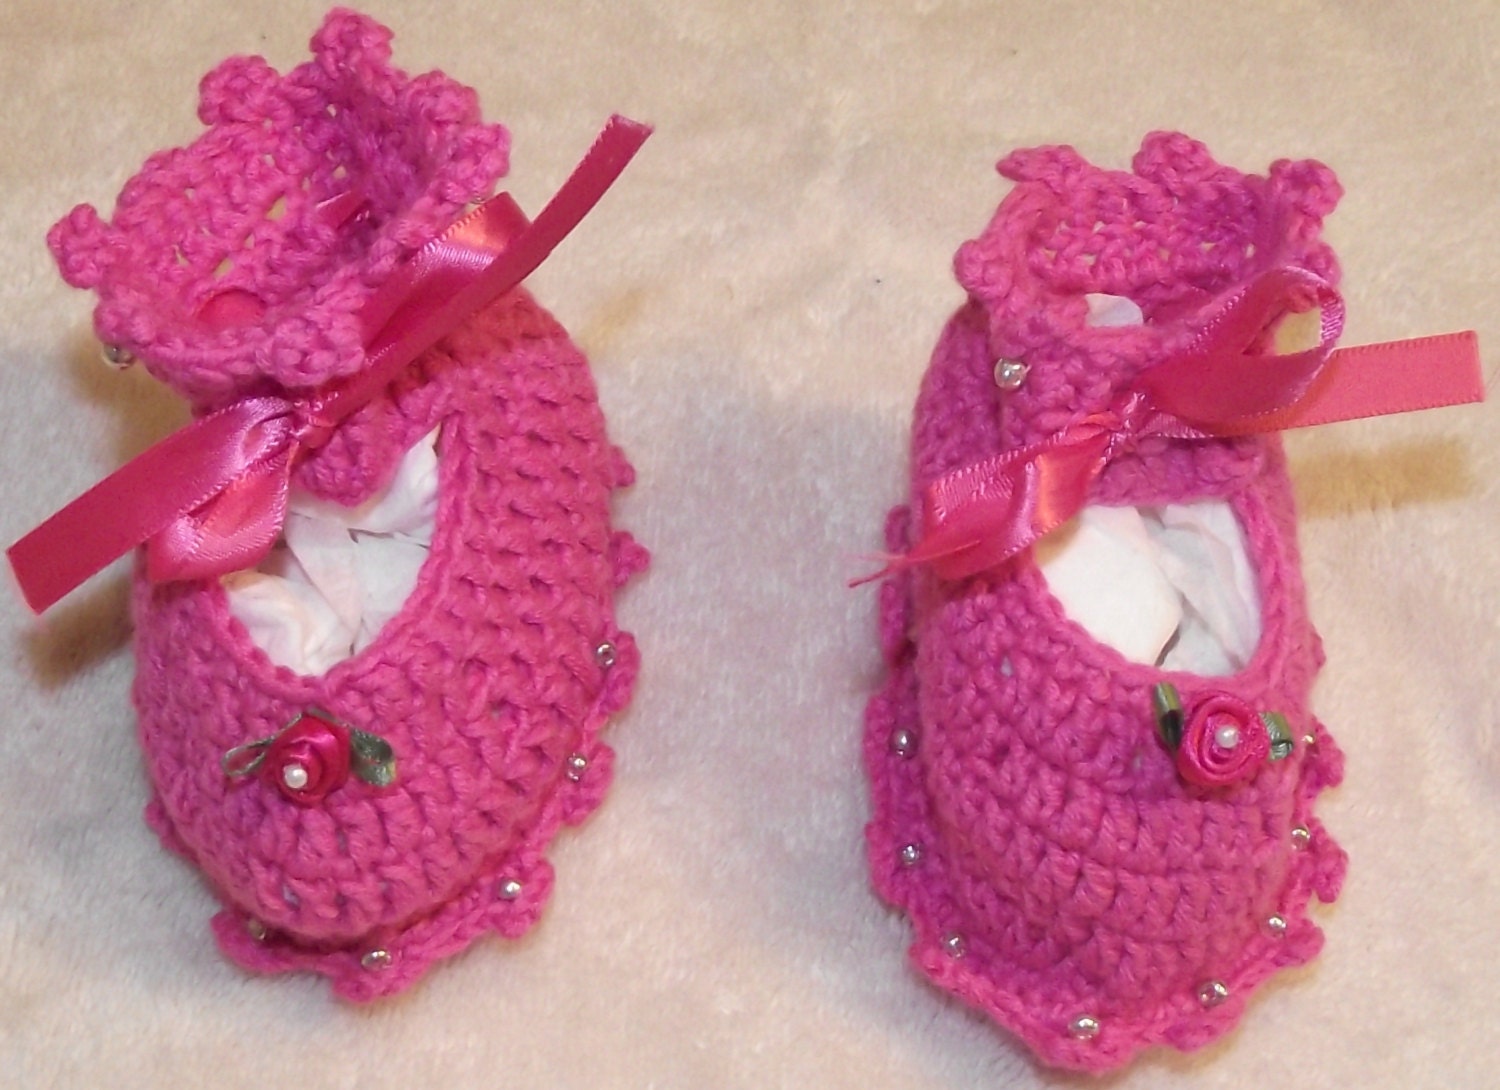 Hand Crocheted & Decorated Pink Cotton Baby Booties.